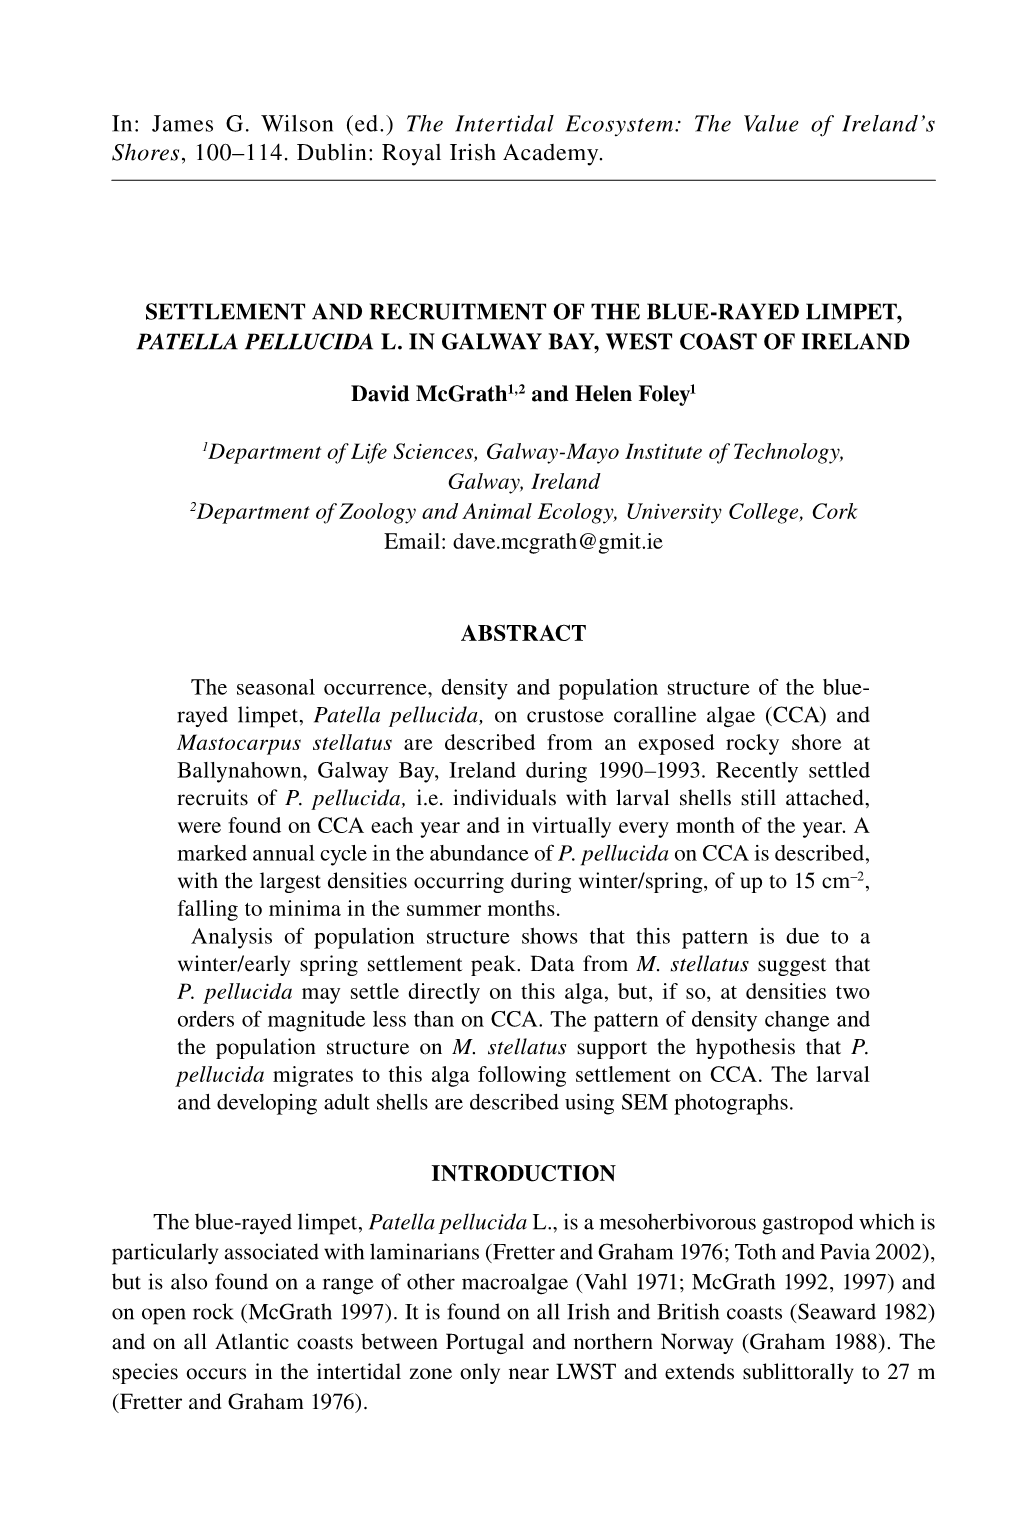 Settlement and Recruitment of the Blue-Rayed Limpet, Patella Pellucida L